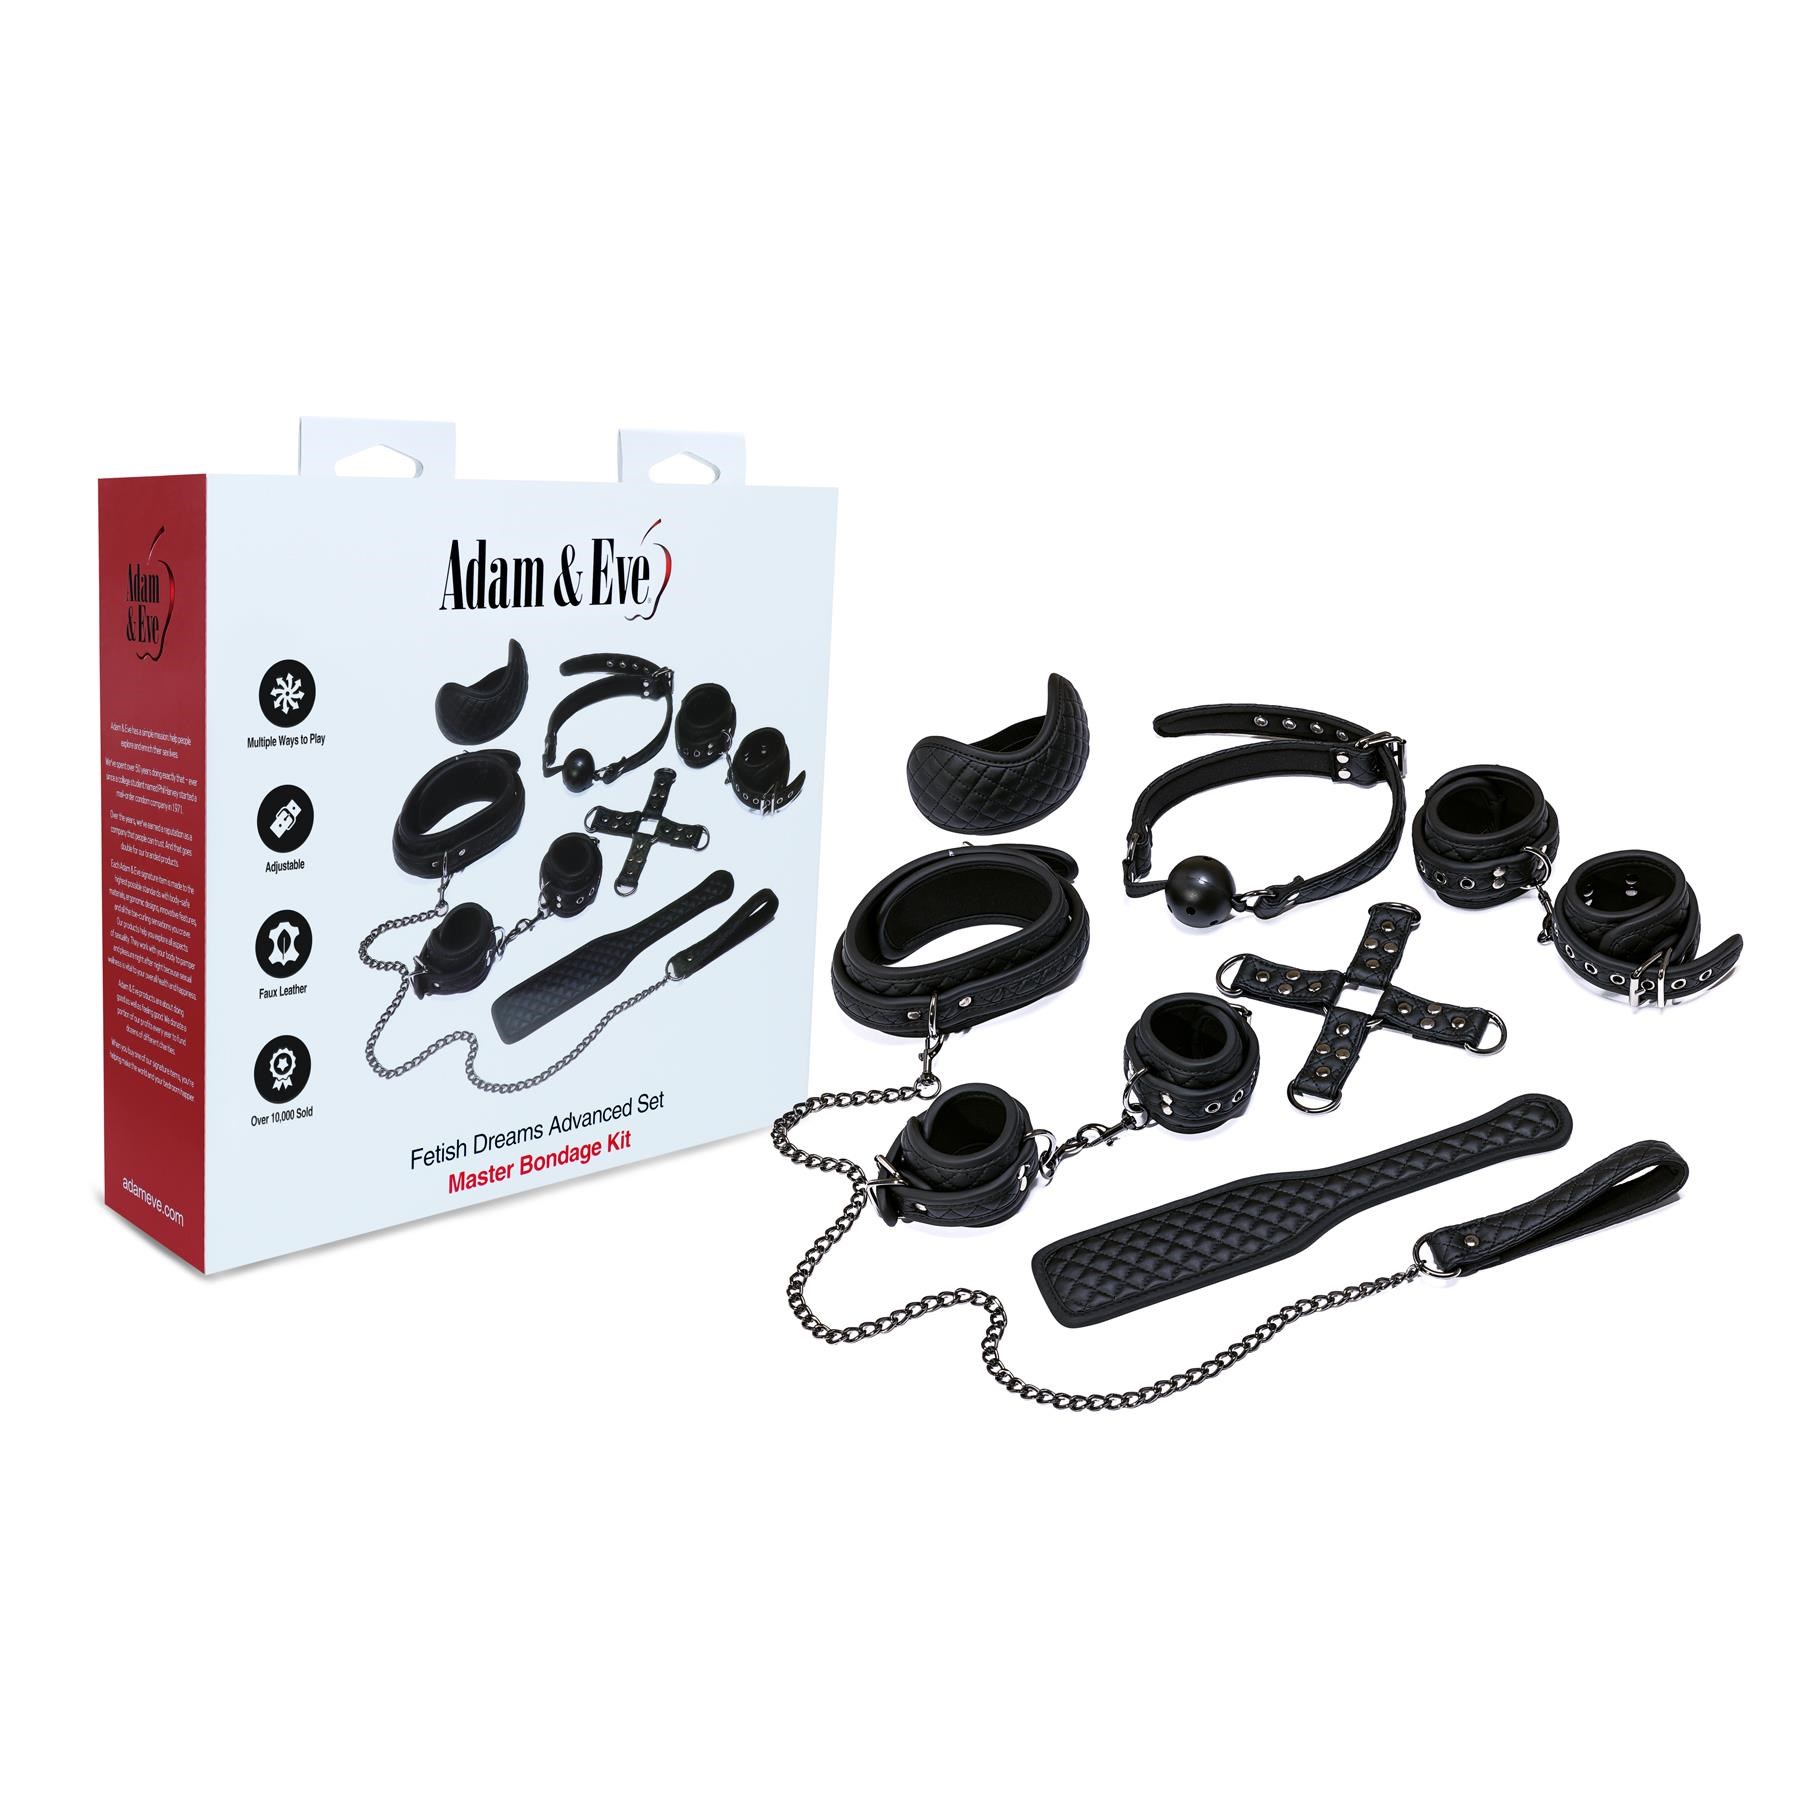 Eve's Fetish Dreams Advanced Bondage Set - Product and Packaging